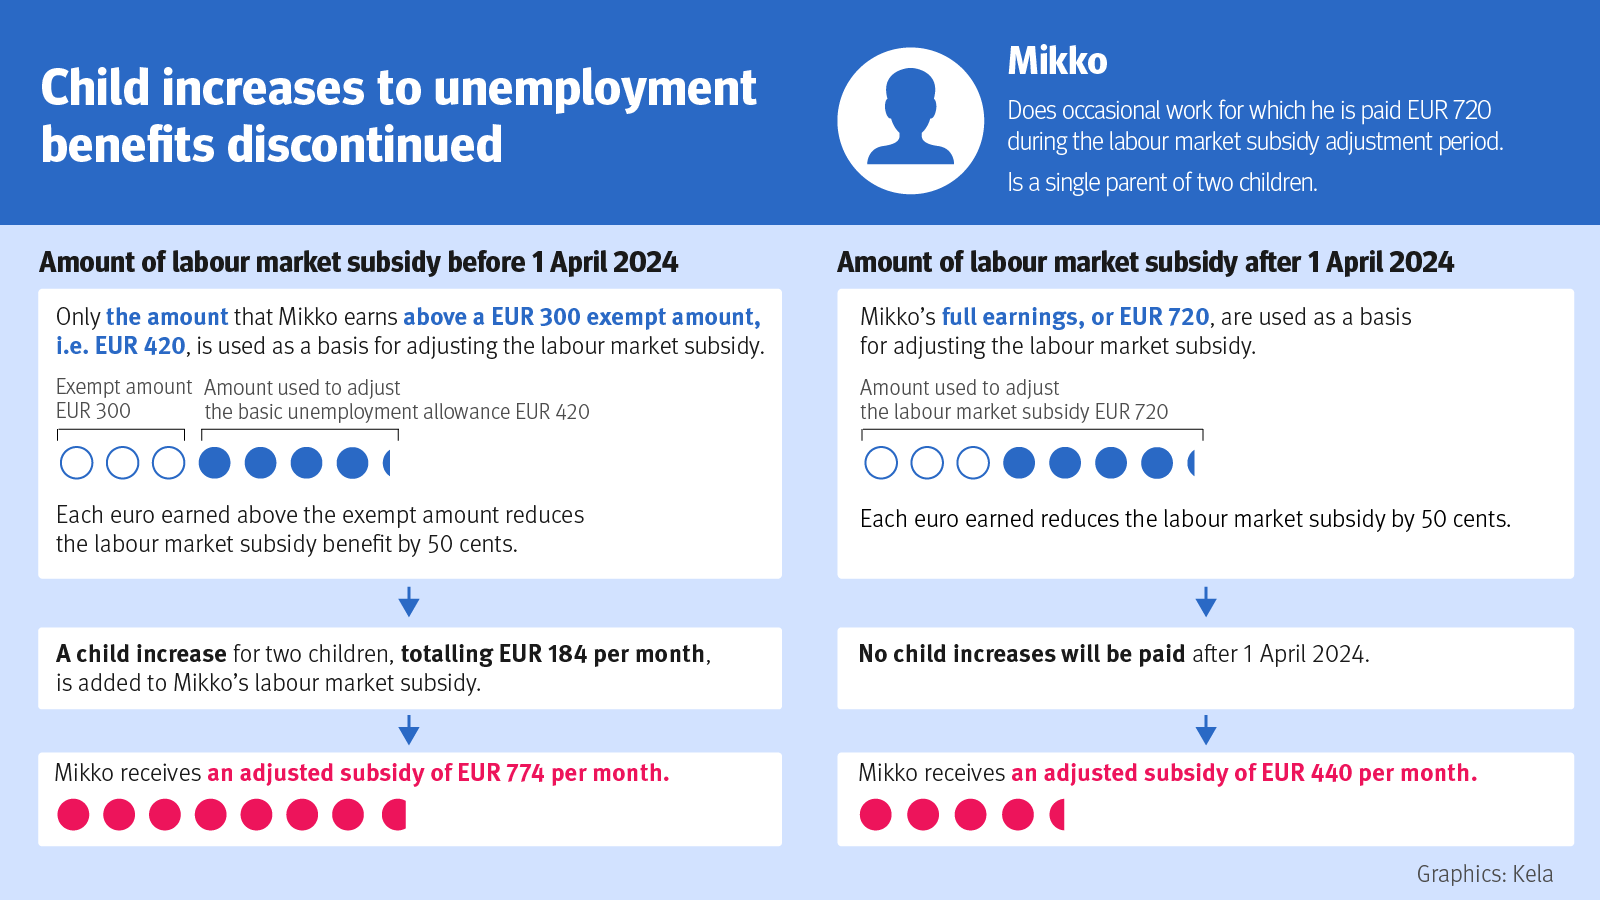 The image shows how the elimination of the child increases supplementing unemployment benefits affects the amount of unemployment benefits received by the person in the example. The data for the image are shown in a table below the image.